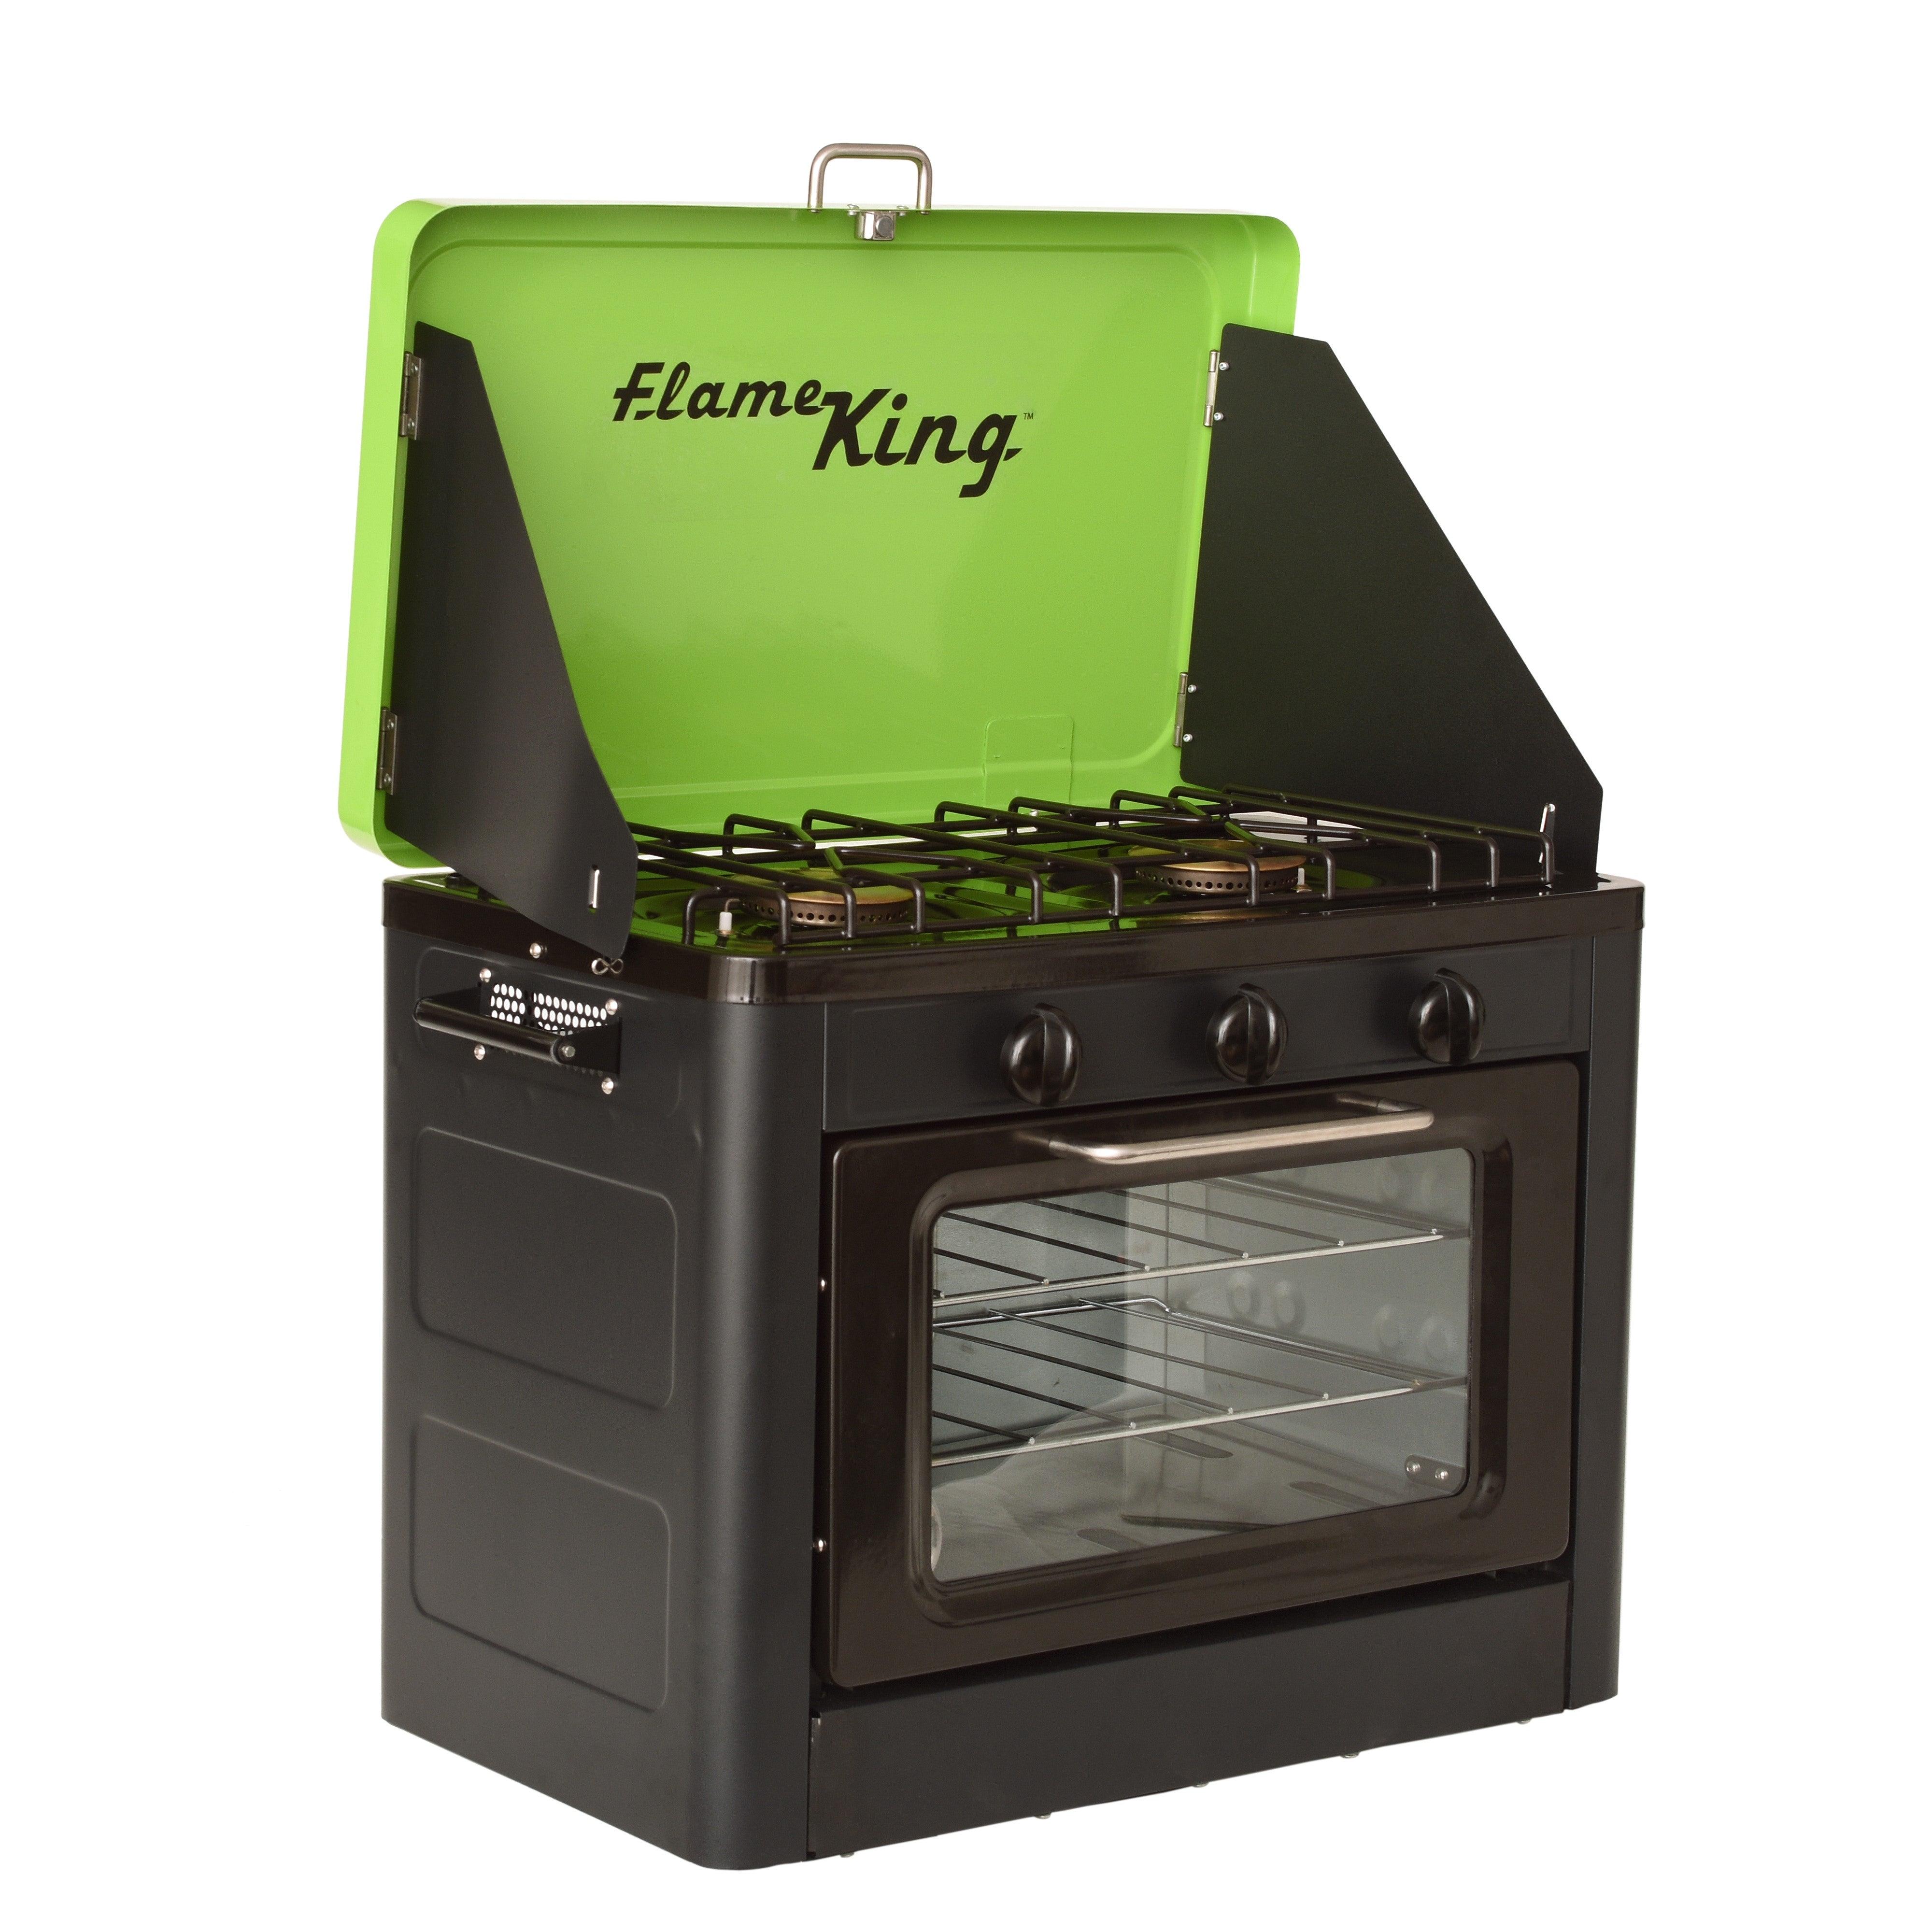 Flame King Portable Camping Oven Stove Combo